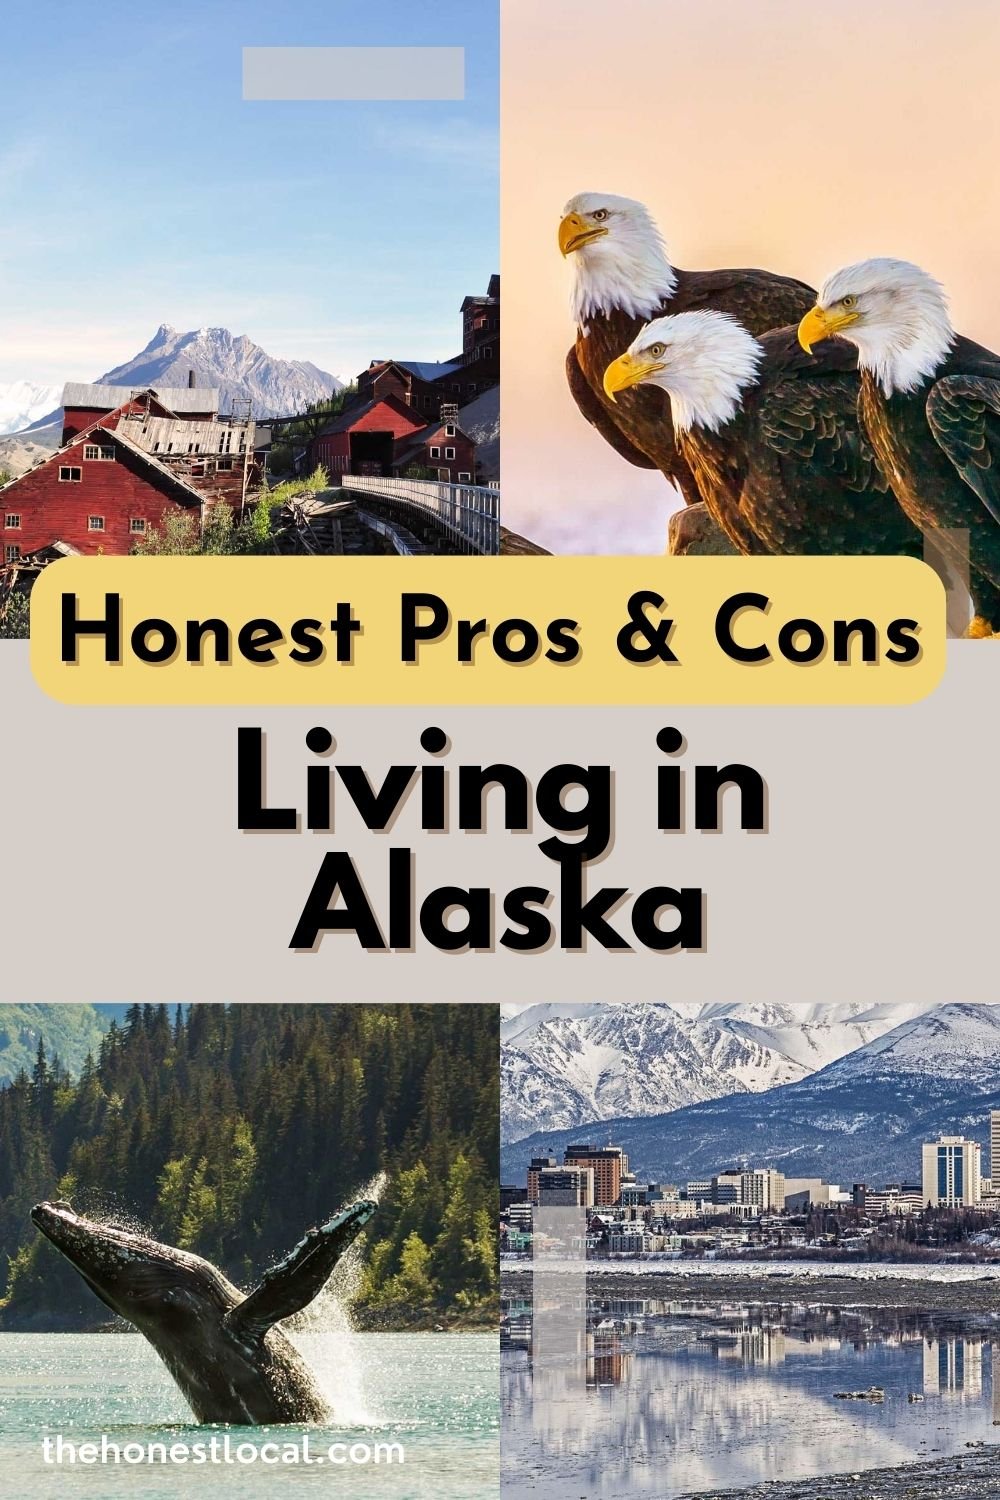 Pros and cons of living in Alaska